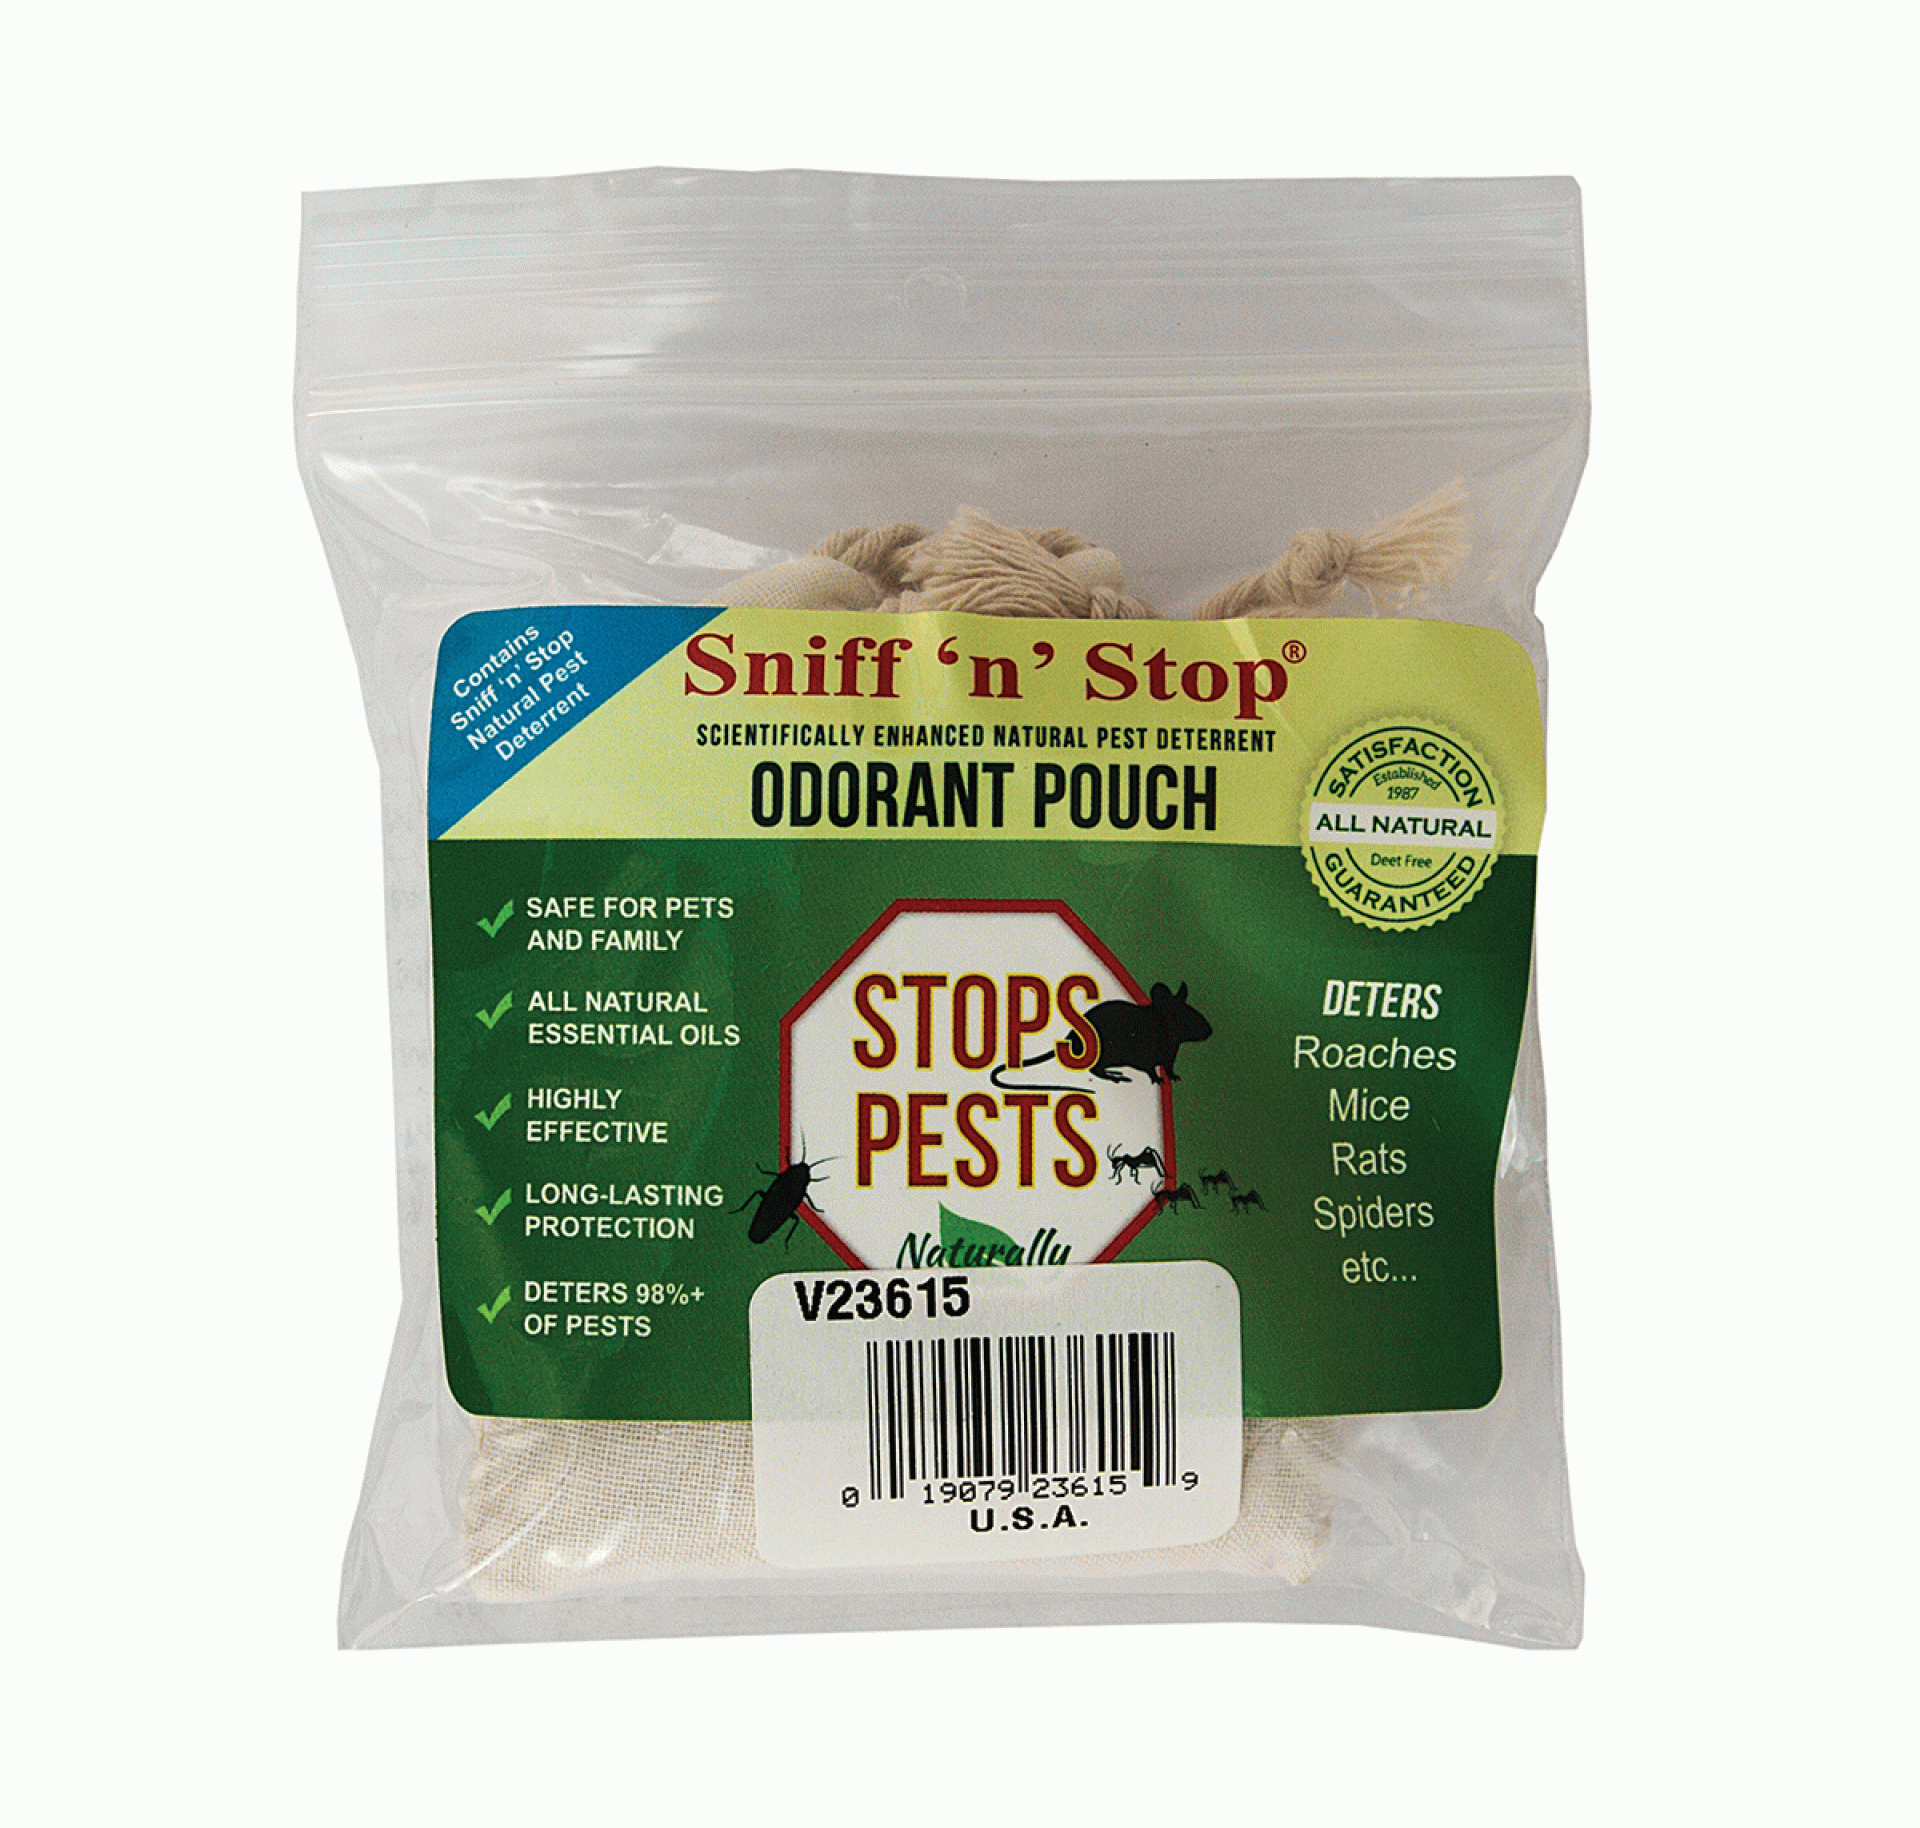 VALTERRA PRODUCTS INC. | V23615 | Sniff 'n' Stop Odorant Single Pouch